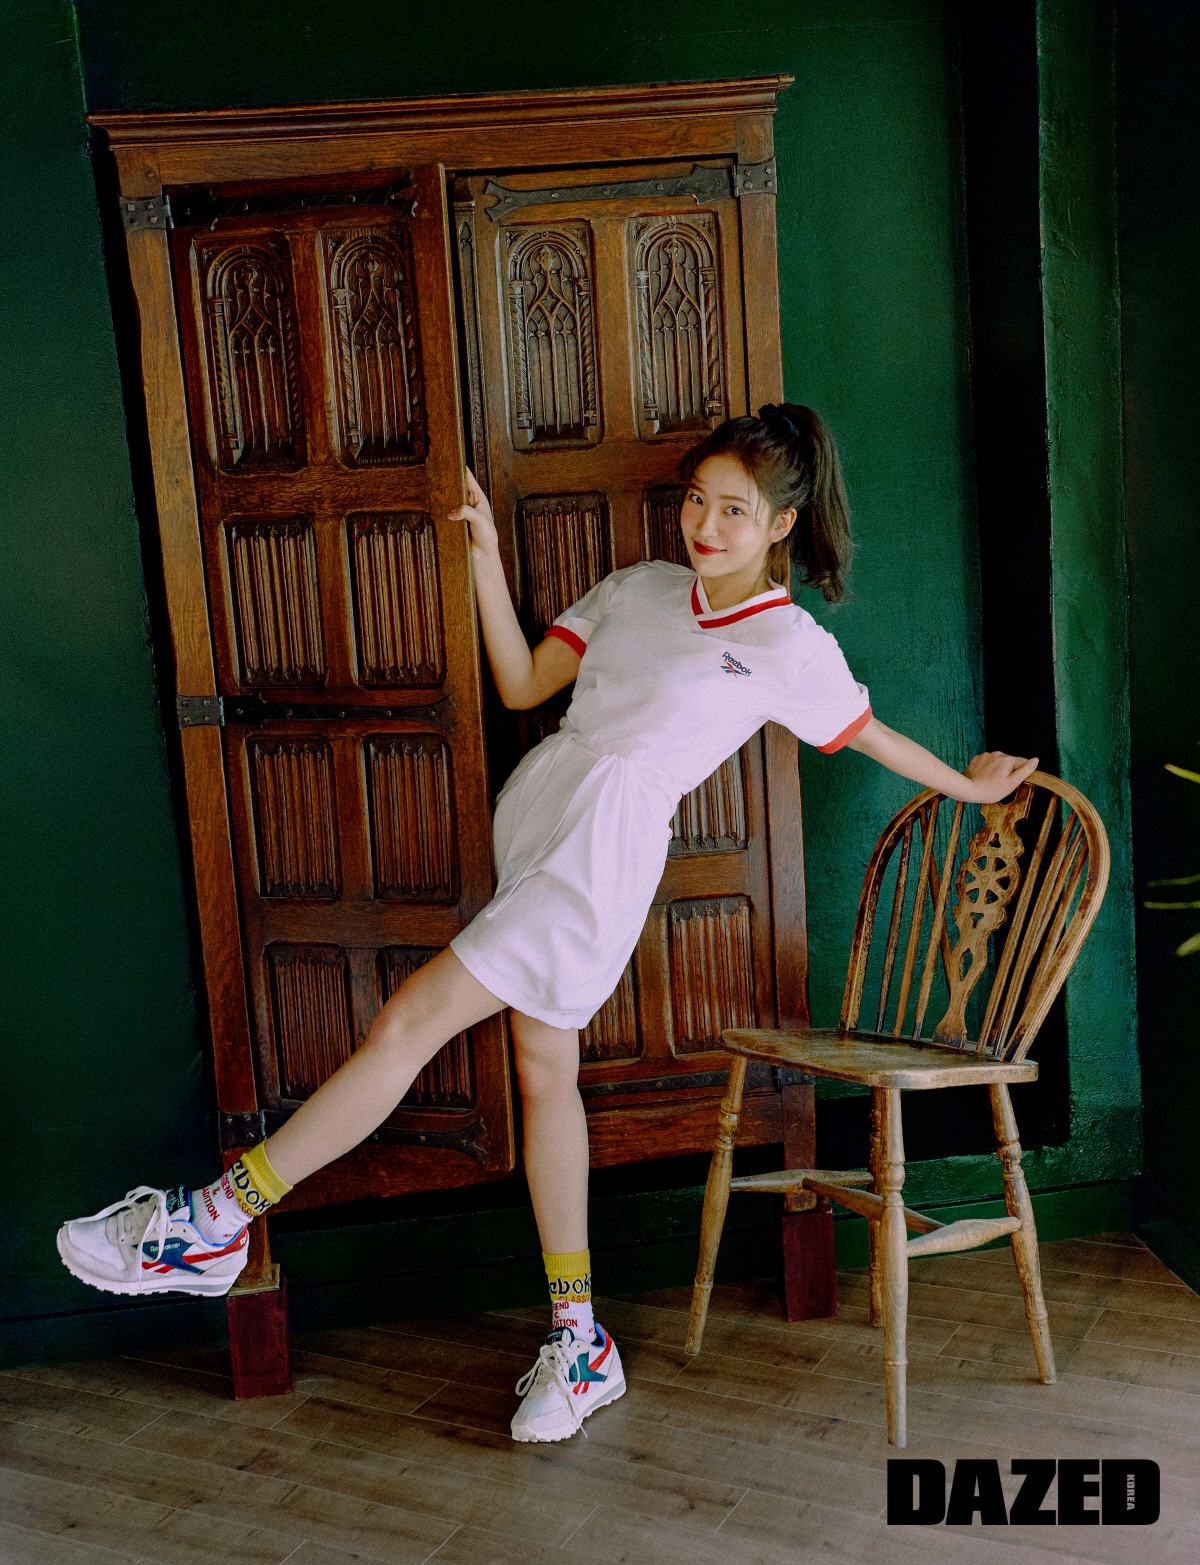 Pictorial properties Yeri is Reeboks heritage can feel Aztec sneakers and various styling showed. Feminine what to highlight tennis skirts and sundresses, or, jumpsuits, shorts use a comfortable and active look-up for a variety comfortable.In an interview Yeri is a Music work started asking me about who announced not only his debut, the beginning of a little had. The usual book to read like to read the book think that Notepad on the naturally good thing. Tremendous operation rather than Notepad and less well in the melody that makes the song become more important. My story Music represented by that you can be attractive I guess. And to answer and Music enthusiasm for the job I also had.This Reebok is a sports brand to a distinctive sporty image a strong brand. So the reverse mood women look back there. Short T-shirt and shorts or a skirt match to cute like I dont?La and Reeboks Aztec sneakers to utilize for styling suggestions and a rising fashion icon as he showed up.Rising as a fashion icon aspiring Yeri of special pictorial and interview in business mode Lok 2020 5 November and home page, Instagram and other official SNS can meet.